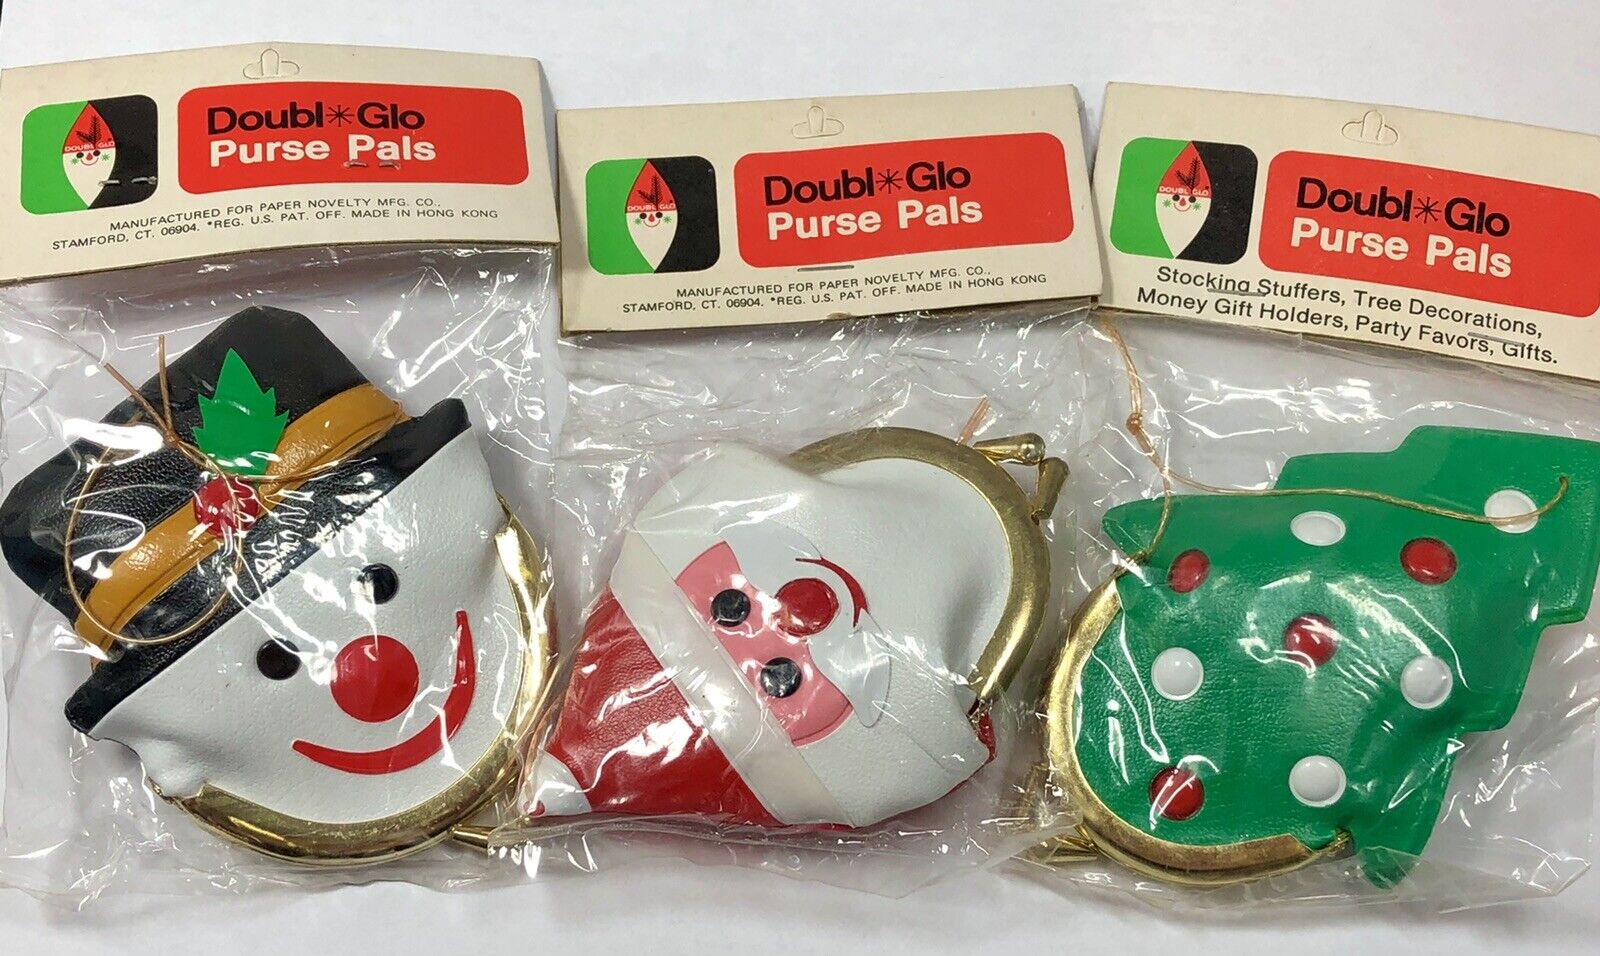 Lot of 3 Doubl Glo Purse Pals Coin Purse Christmas Stocking Stuffers New